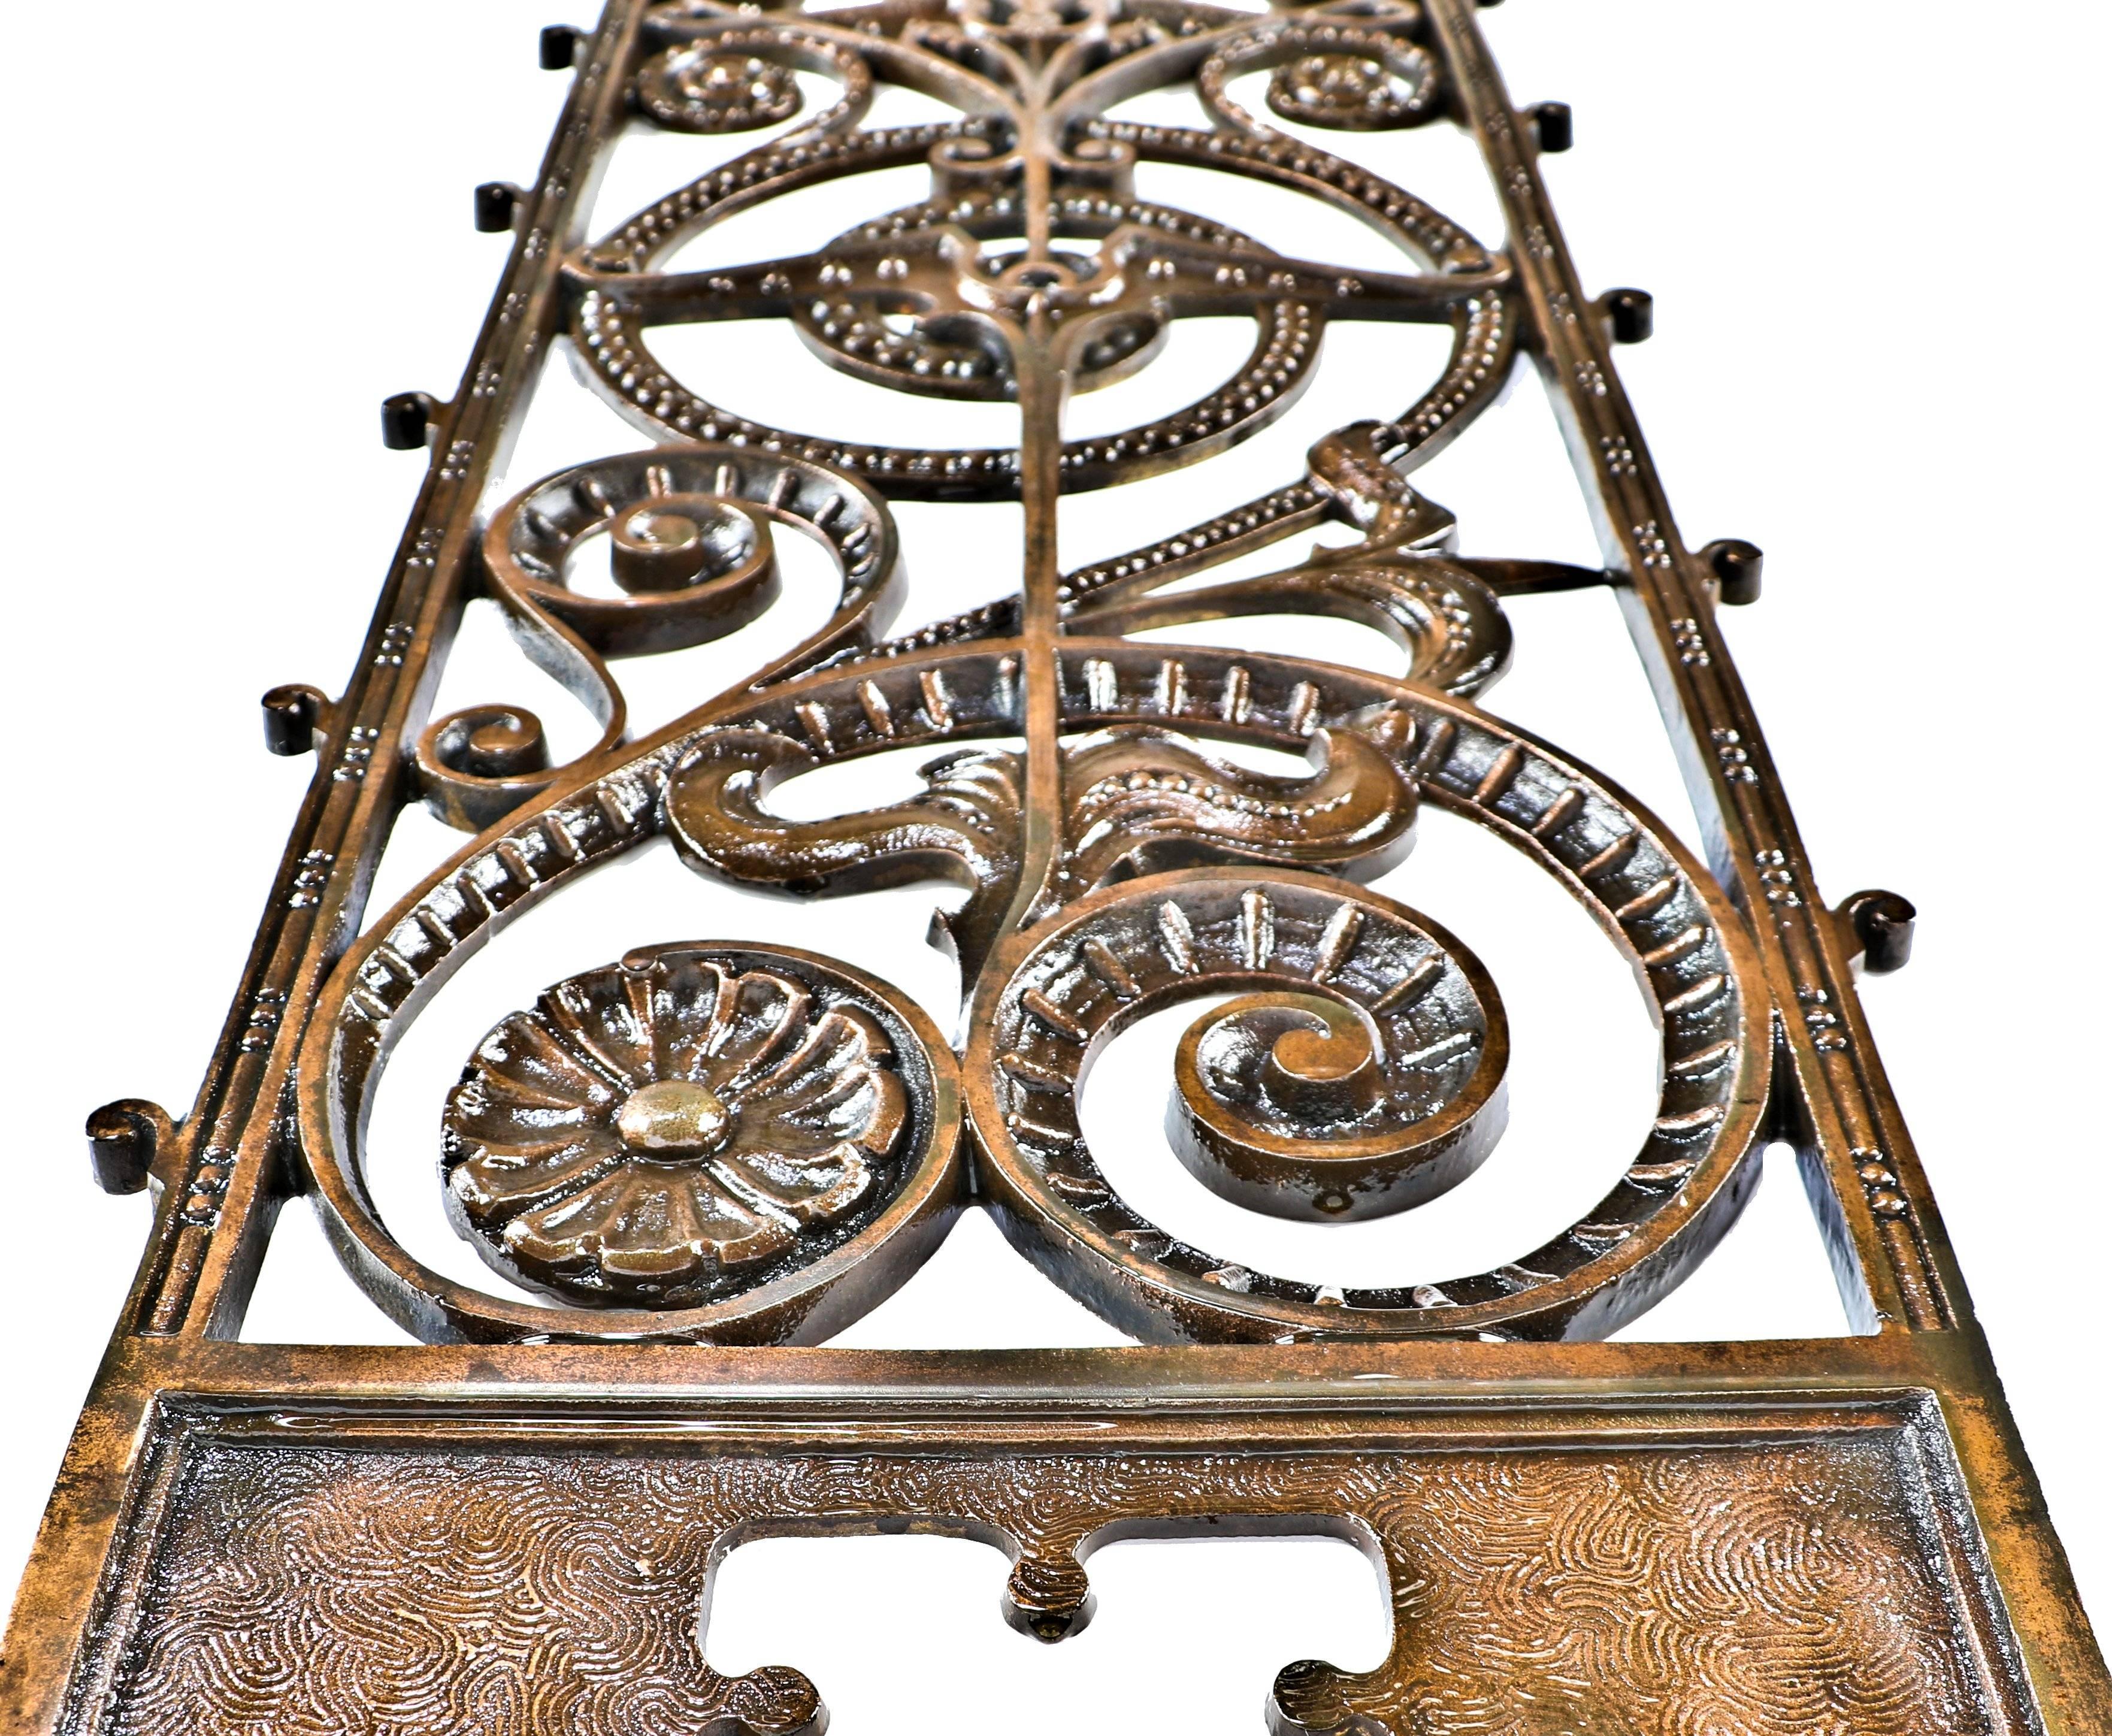 All original and exceptionally intact historically important 19th century American copper-plated cast iron interior elevator lobby grille panel salvaged from the extant Downtown Chicago Manhattan building. The single-sided heavily ornamented iron